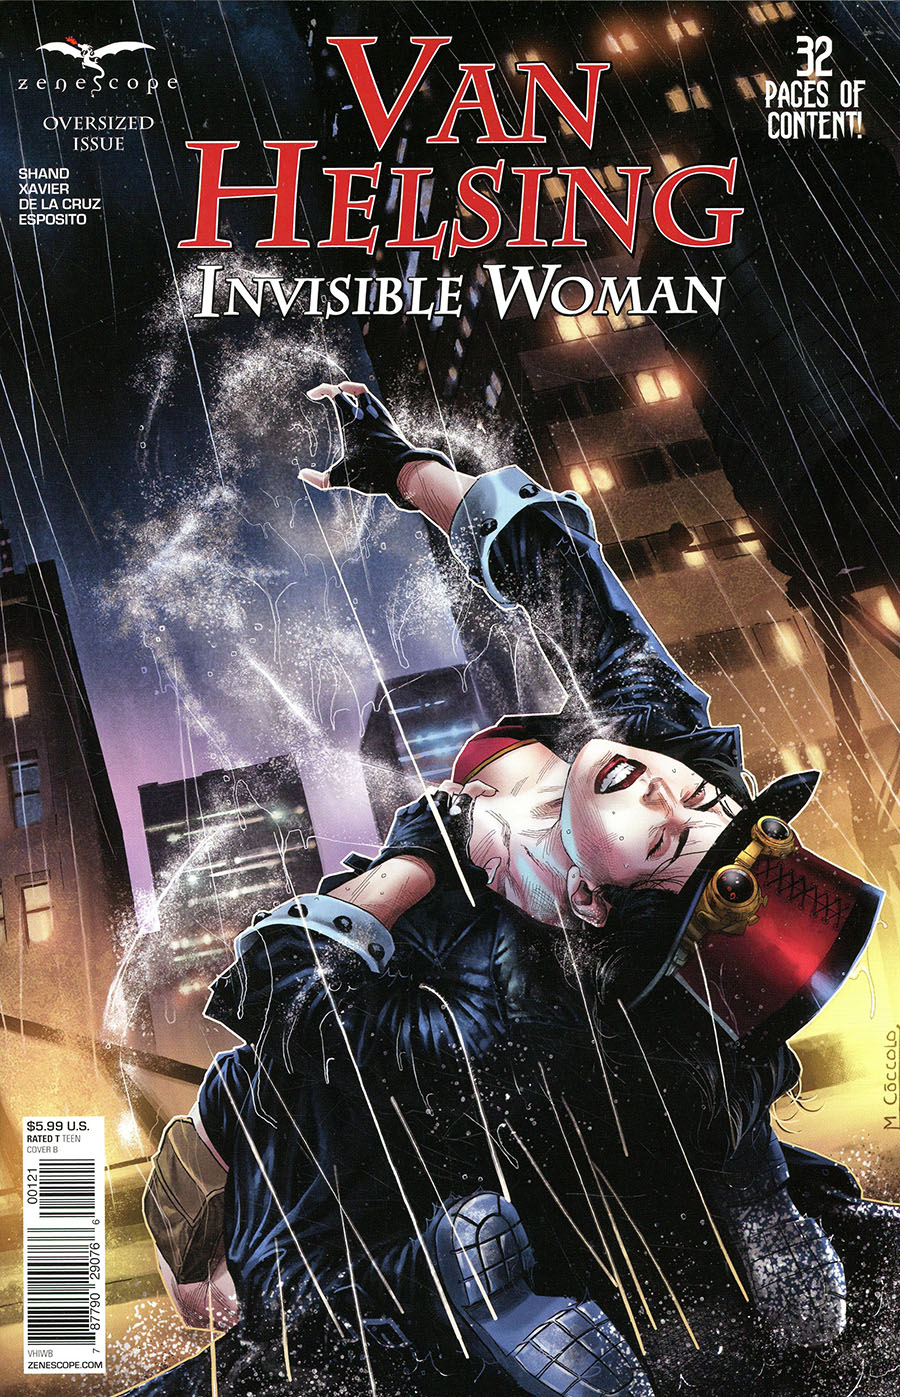 Grimm Fairy Tales Presents Van Helsing vs Invisible Woman #1 (One Shot) Cover B Martin Coccolo